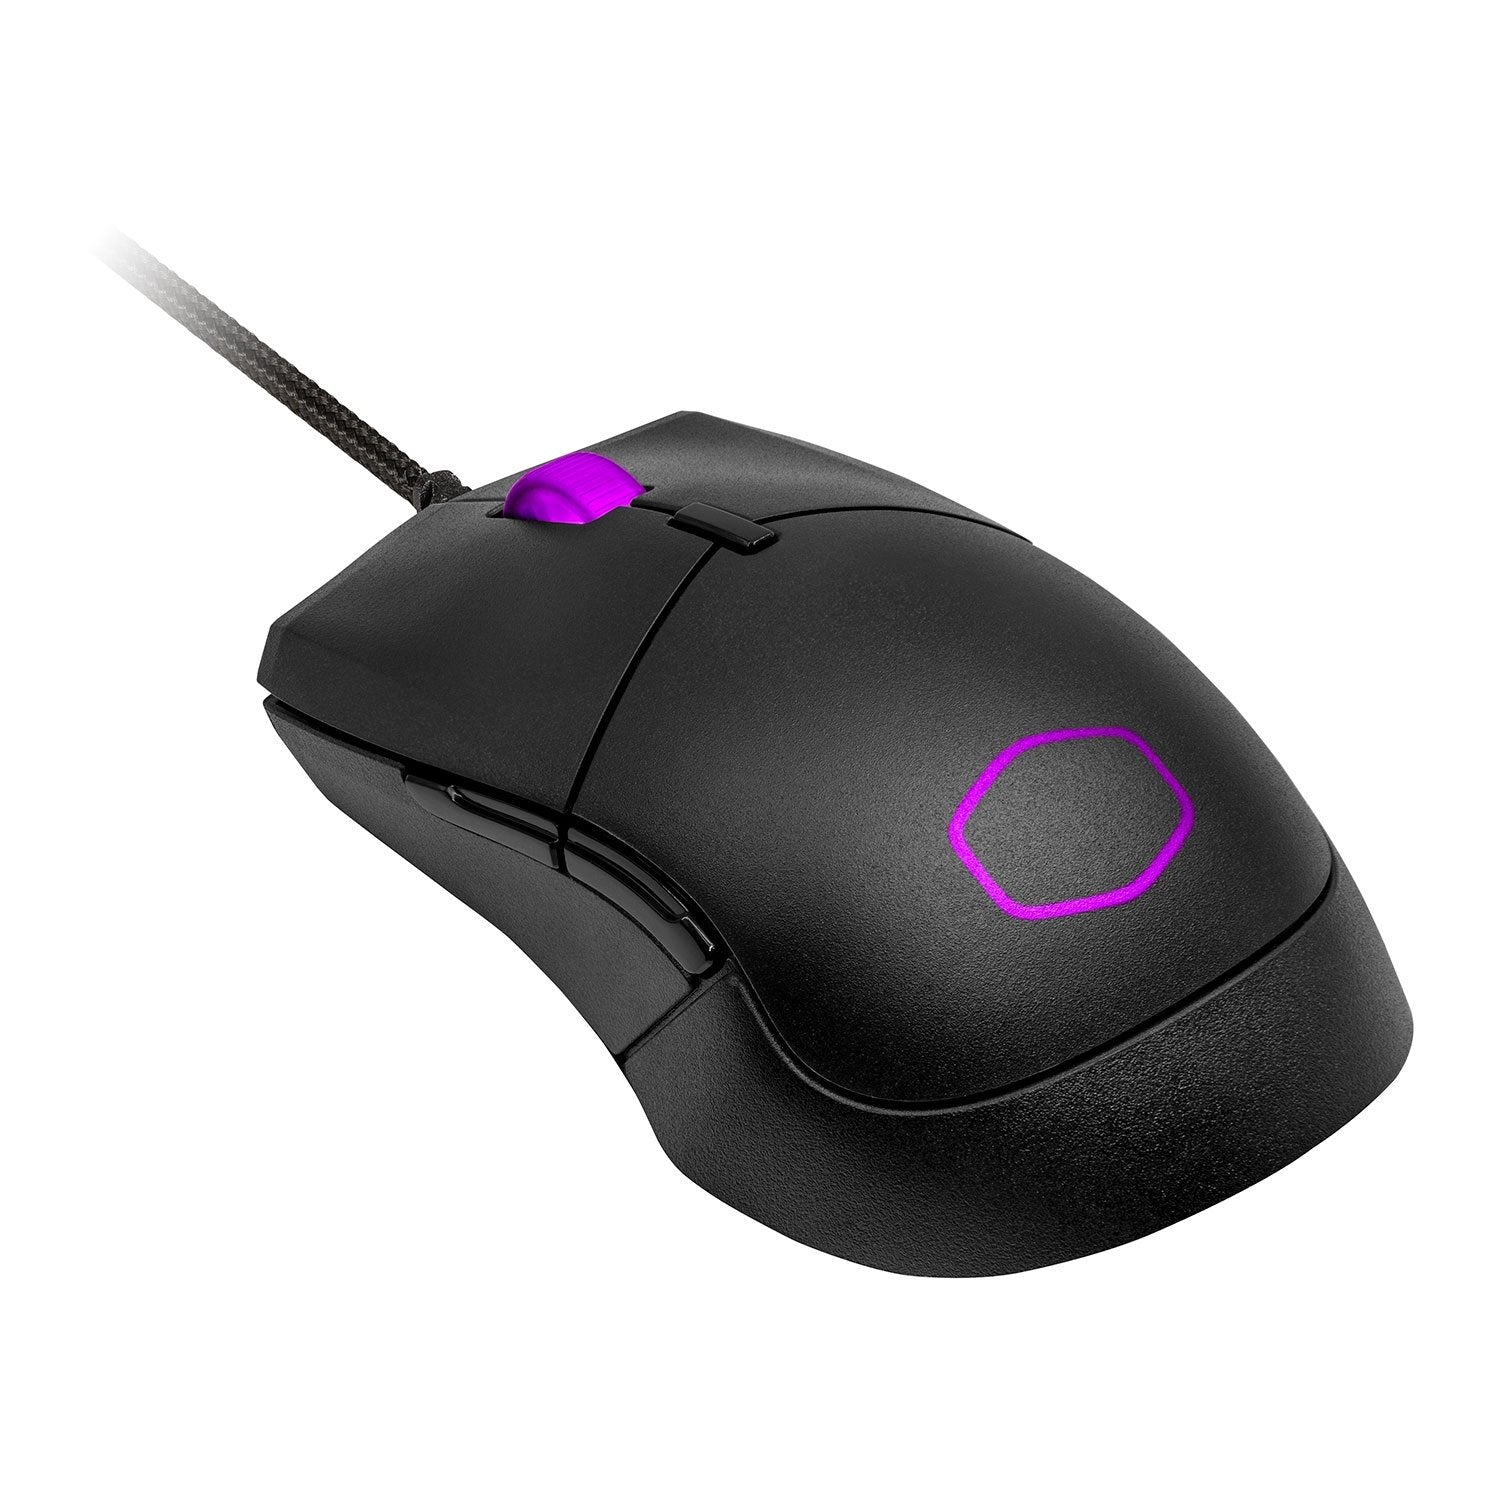 Cooler Master MM310 RGB Lightweight Optical PC Gaming Mouse - Black